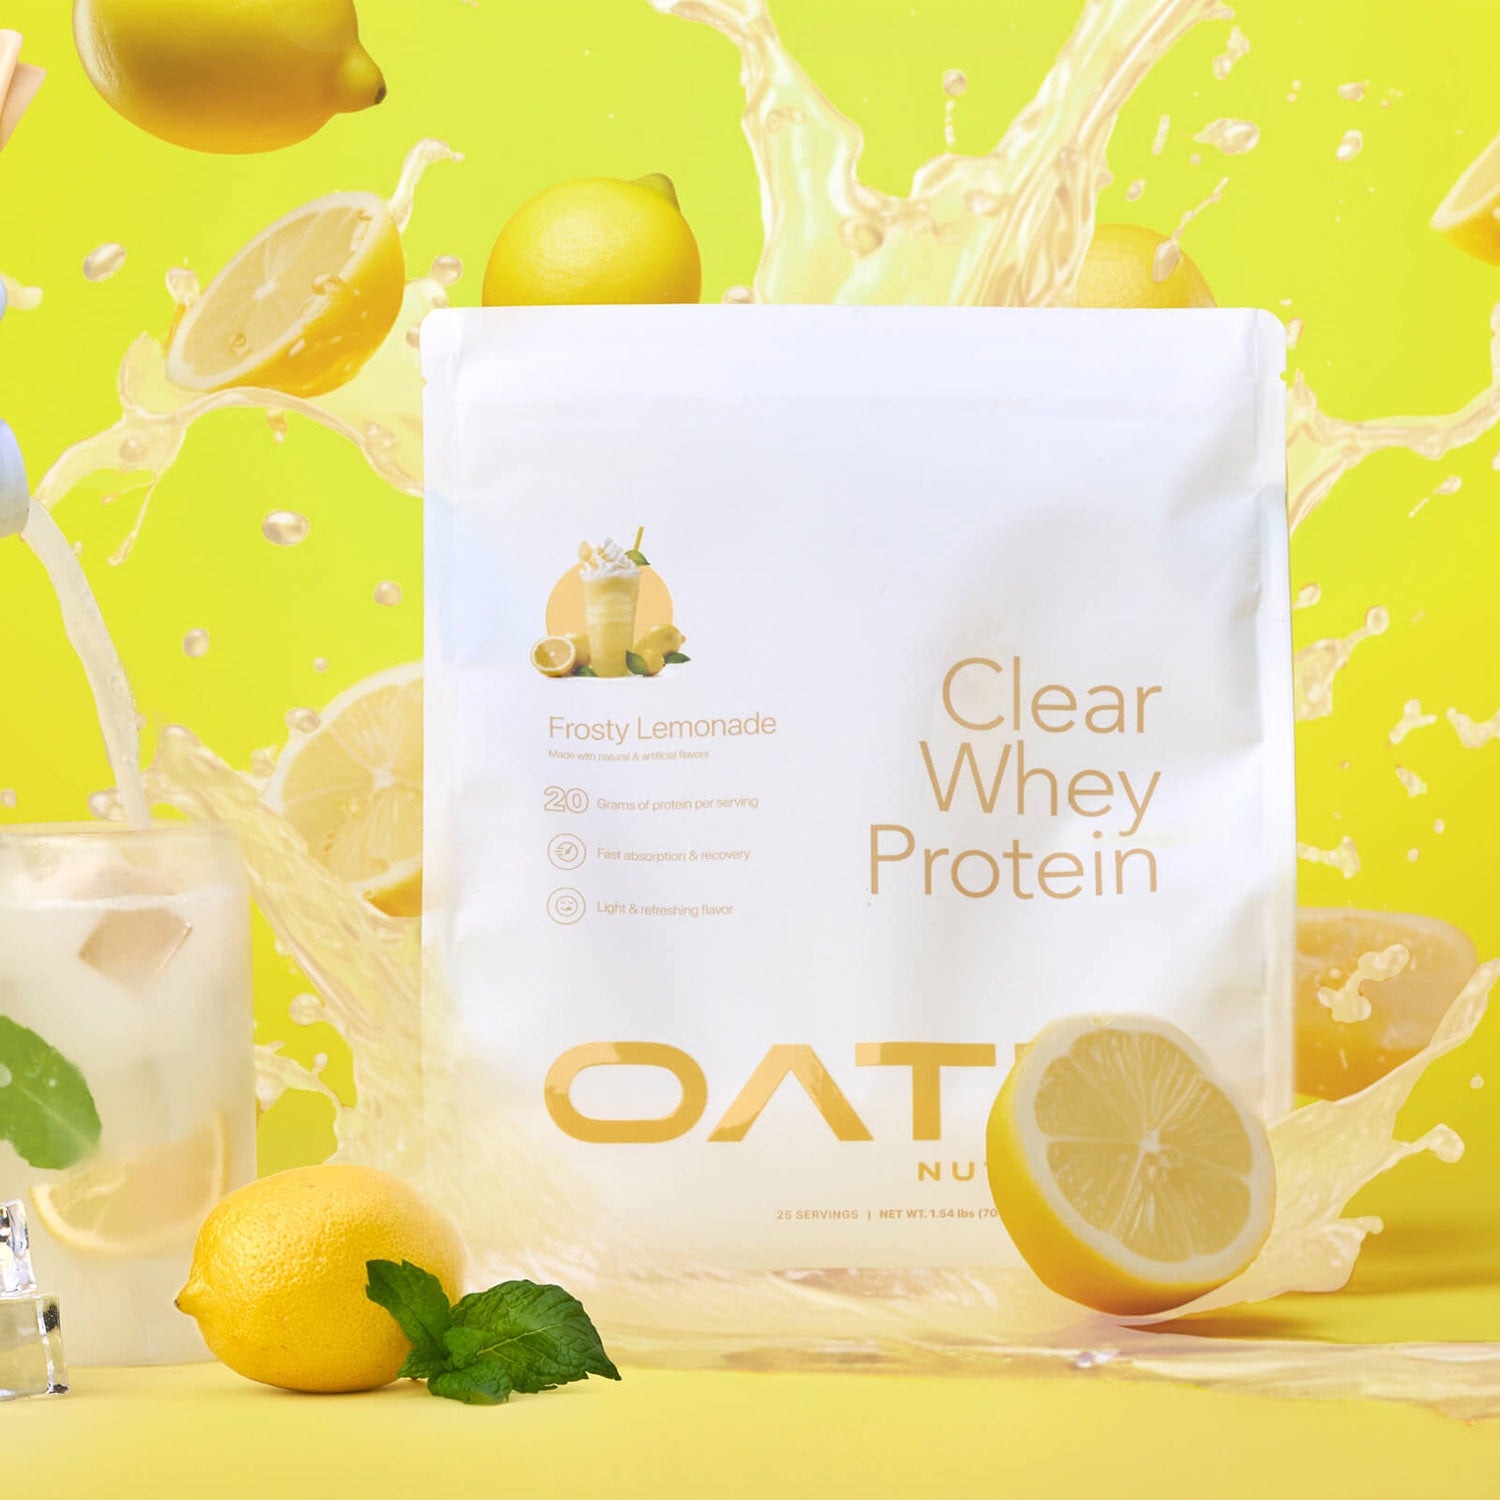 Delicious Oath Clear Whey Fruity protein with lemons bursting around the bag and lemonade clear whey in a glass.